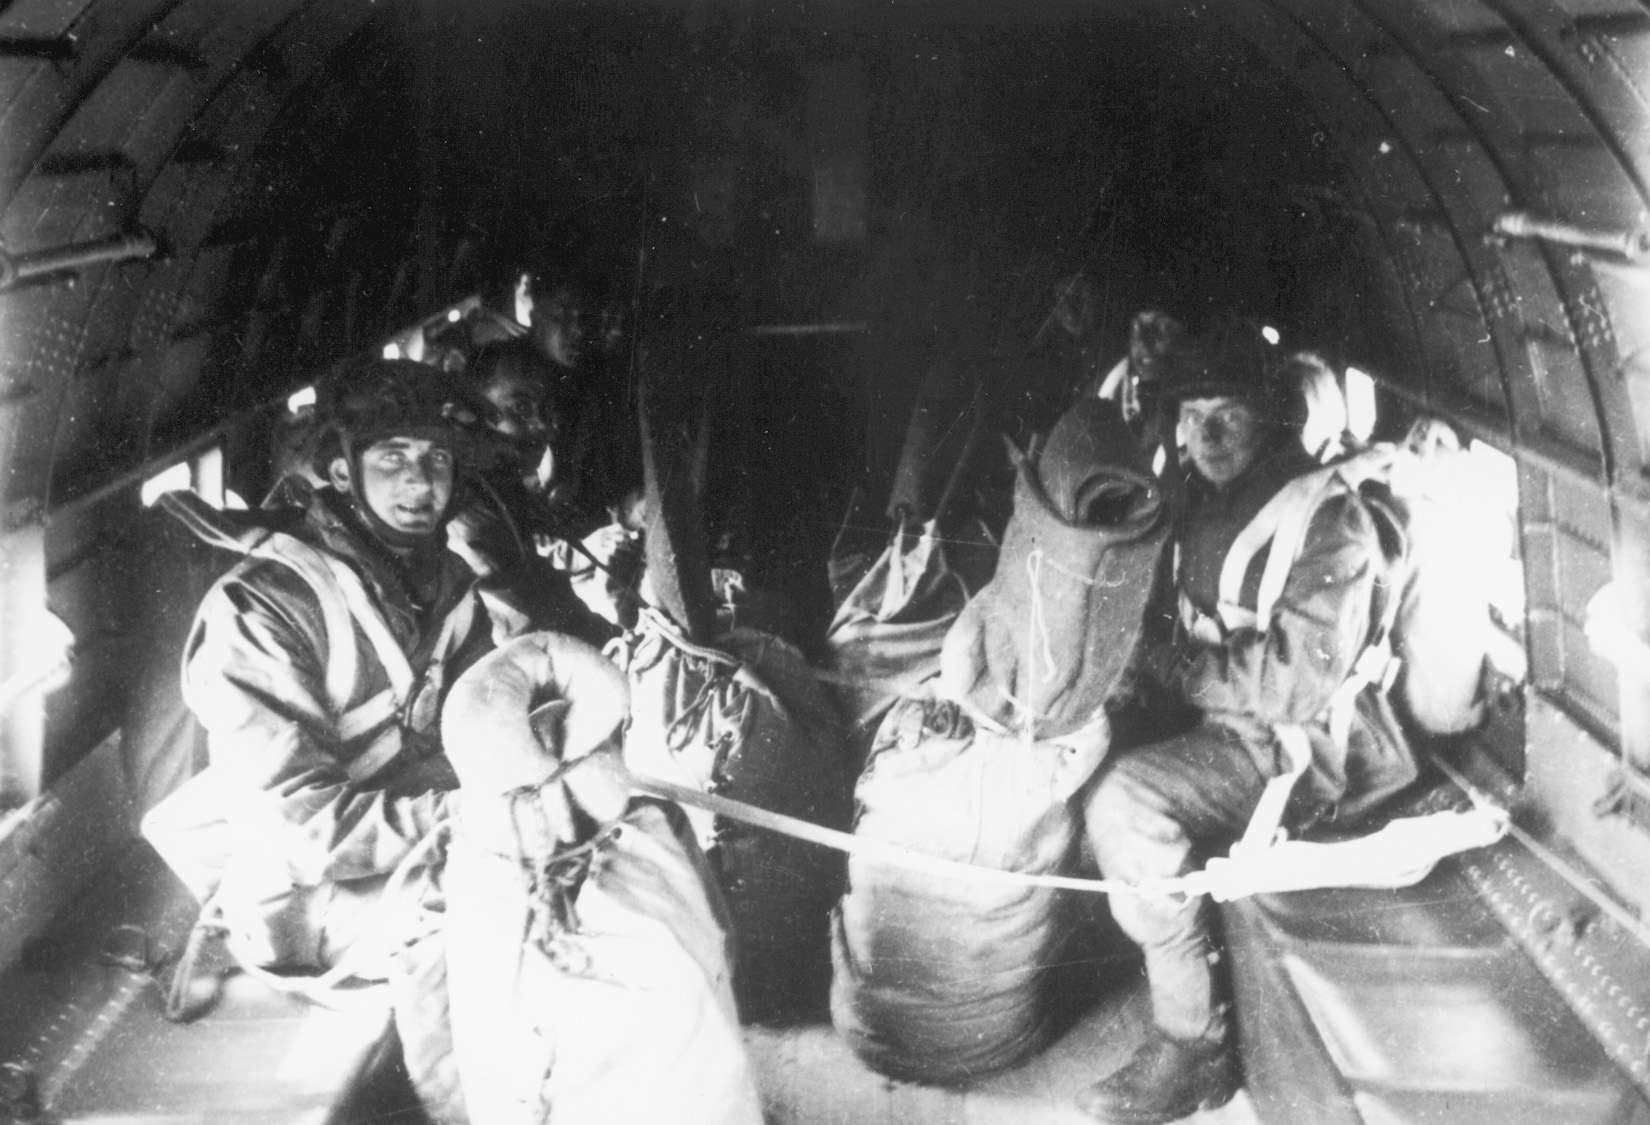 Paratroopers pose for a photo on the day of their airlift to the drop zones in Germany.